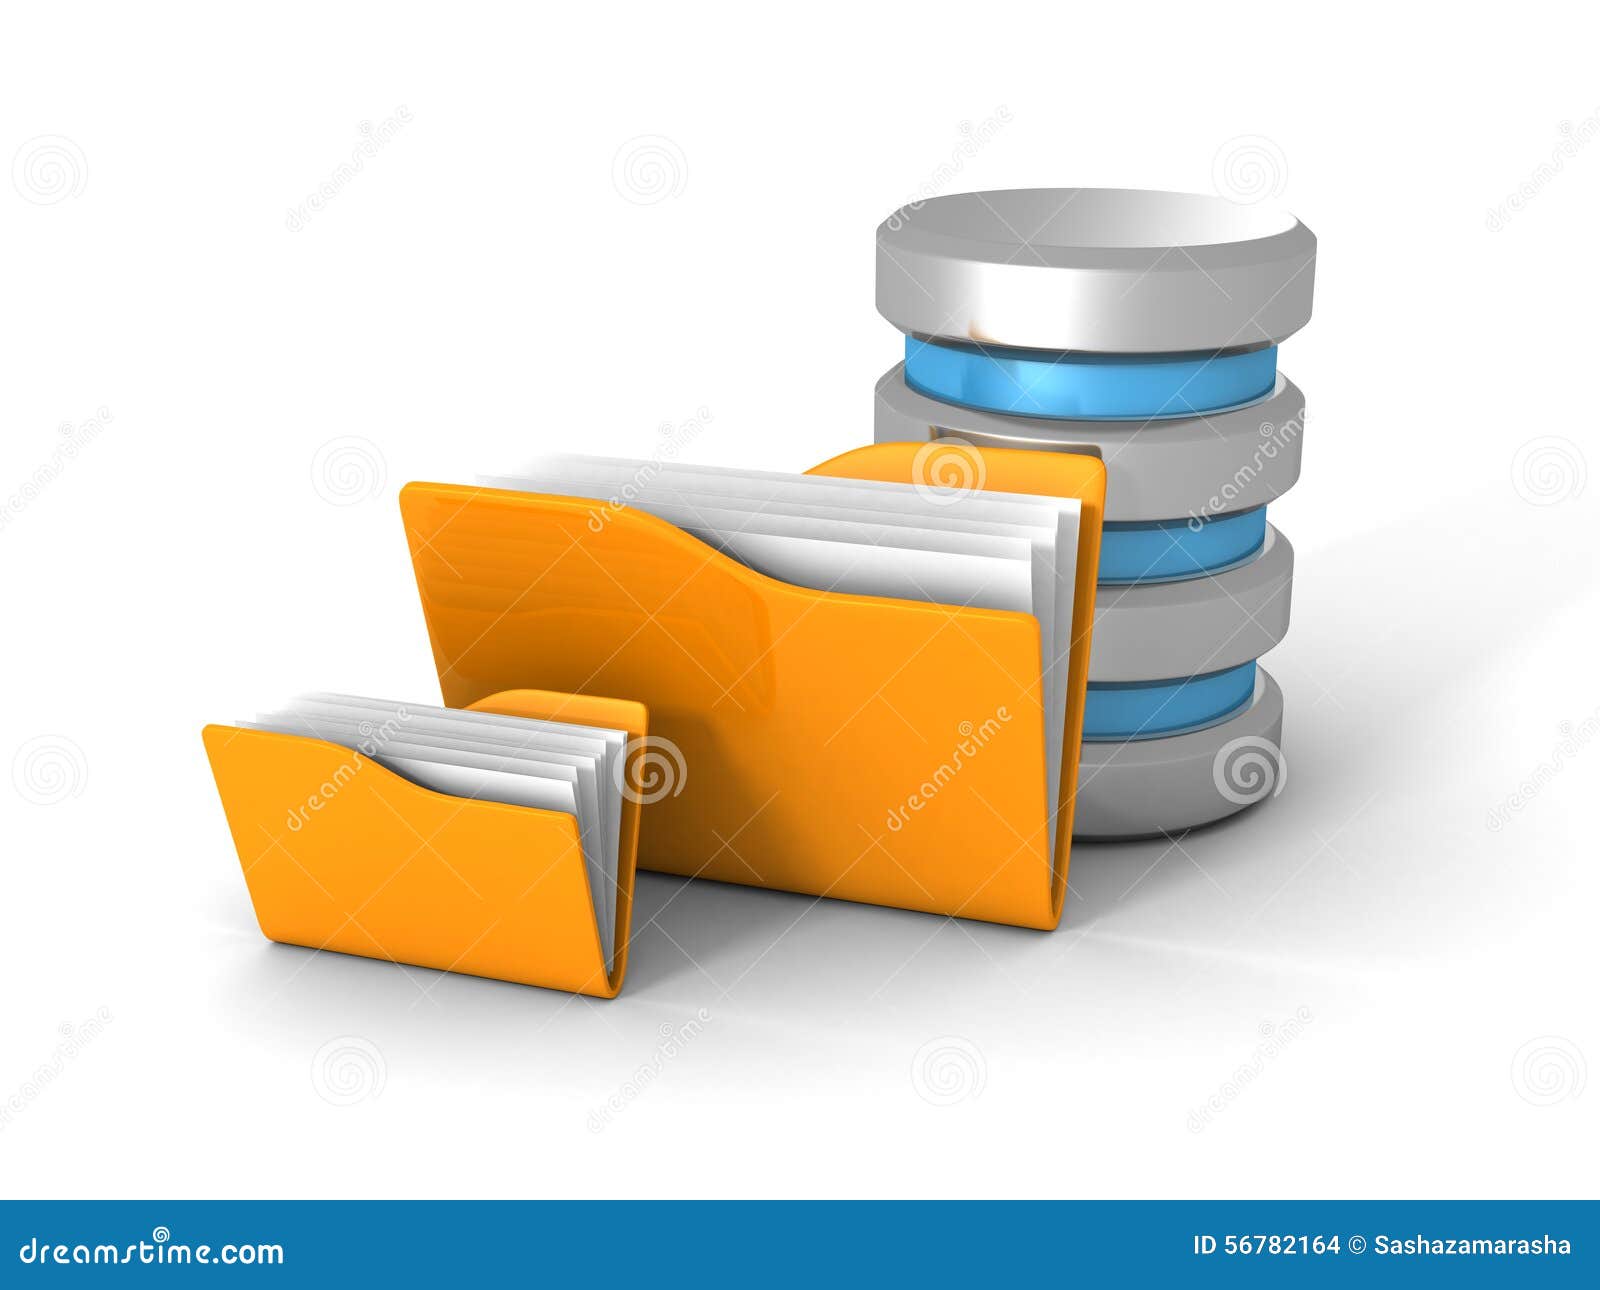 office clipart database - photo #7